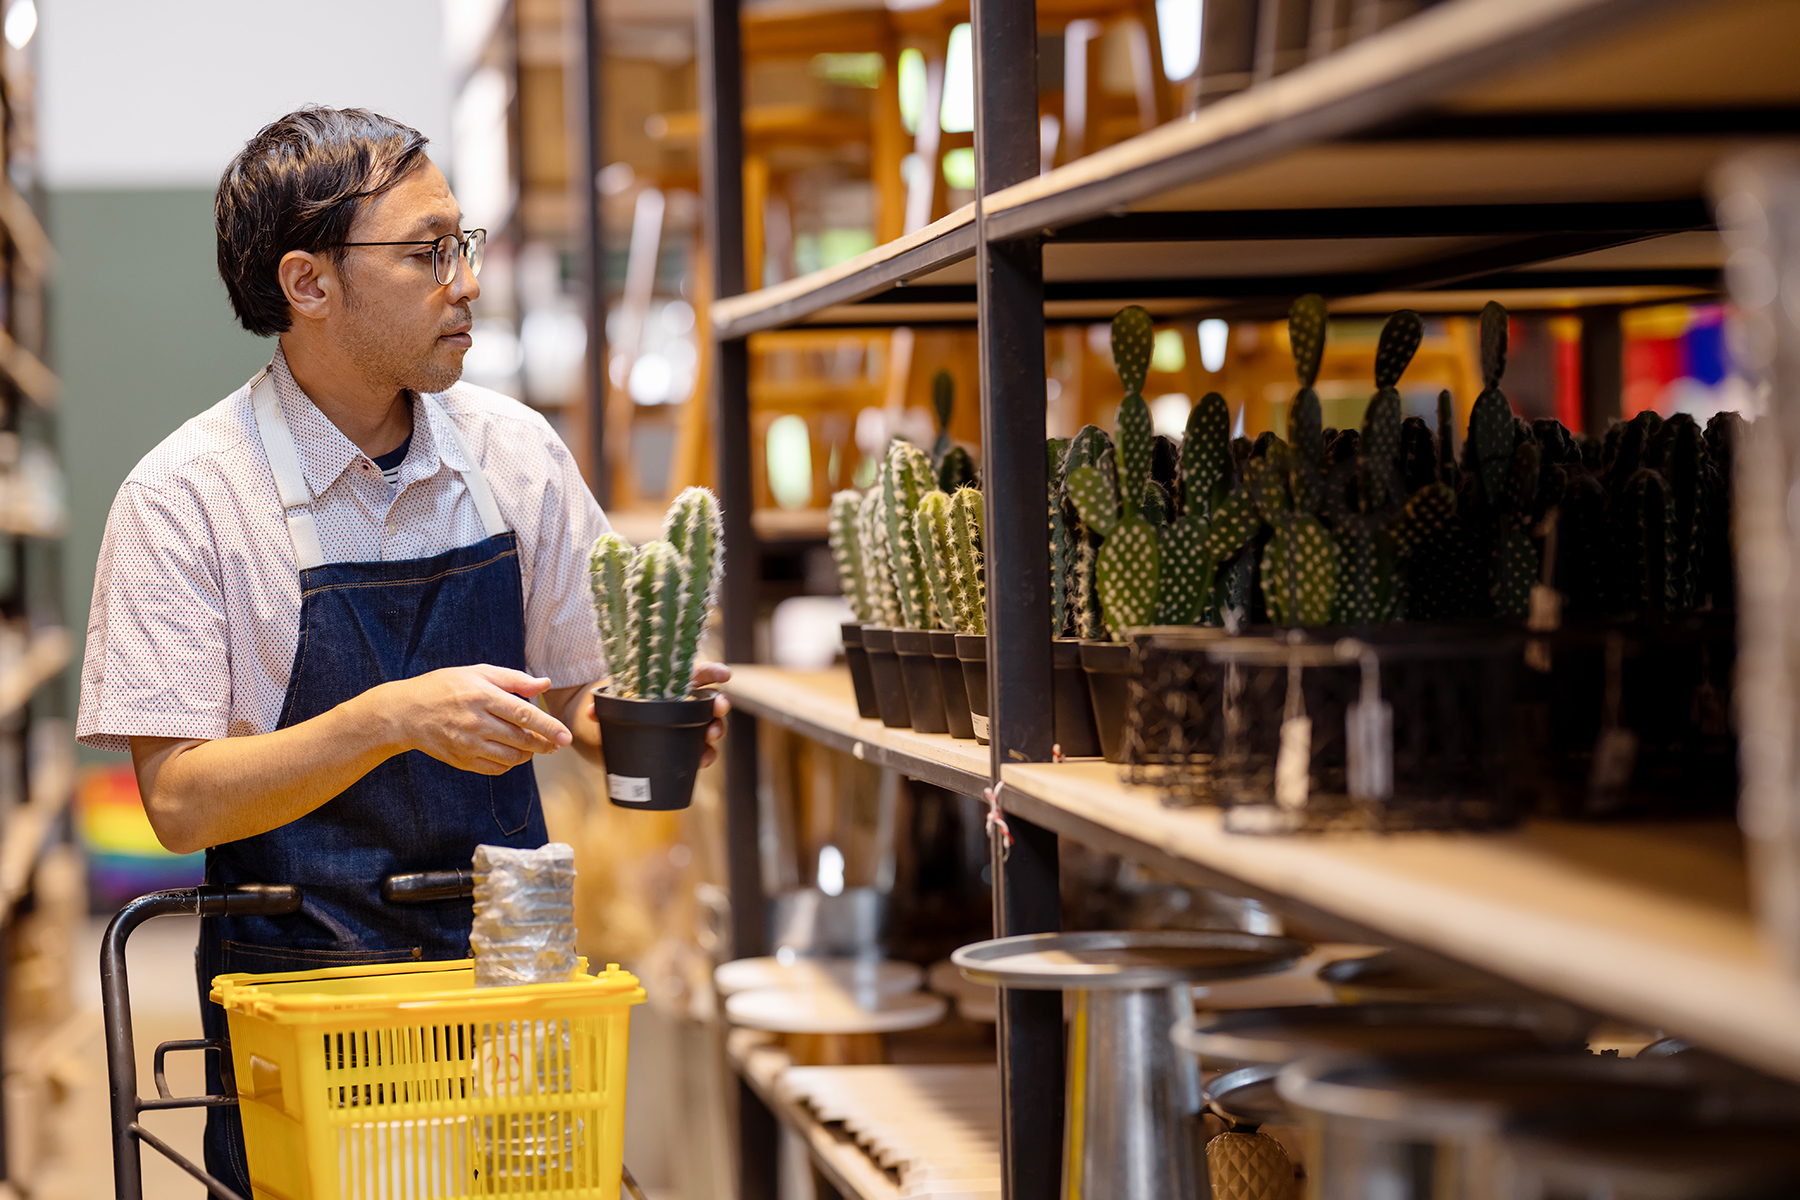 A man putting a potted cactus on a shelf of other potted cacti

